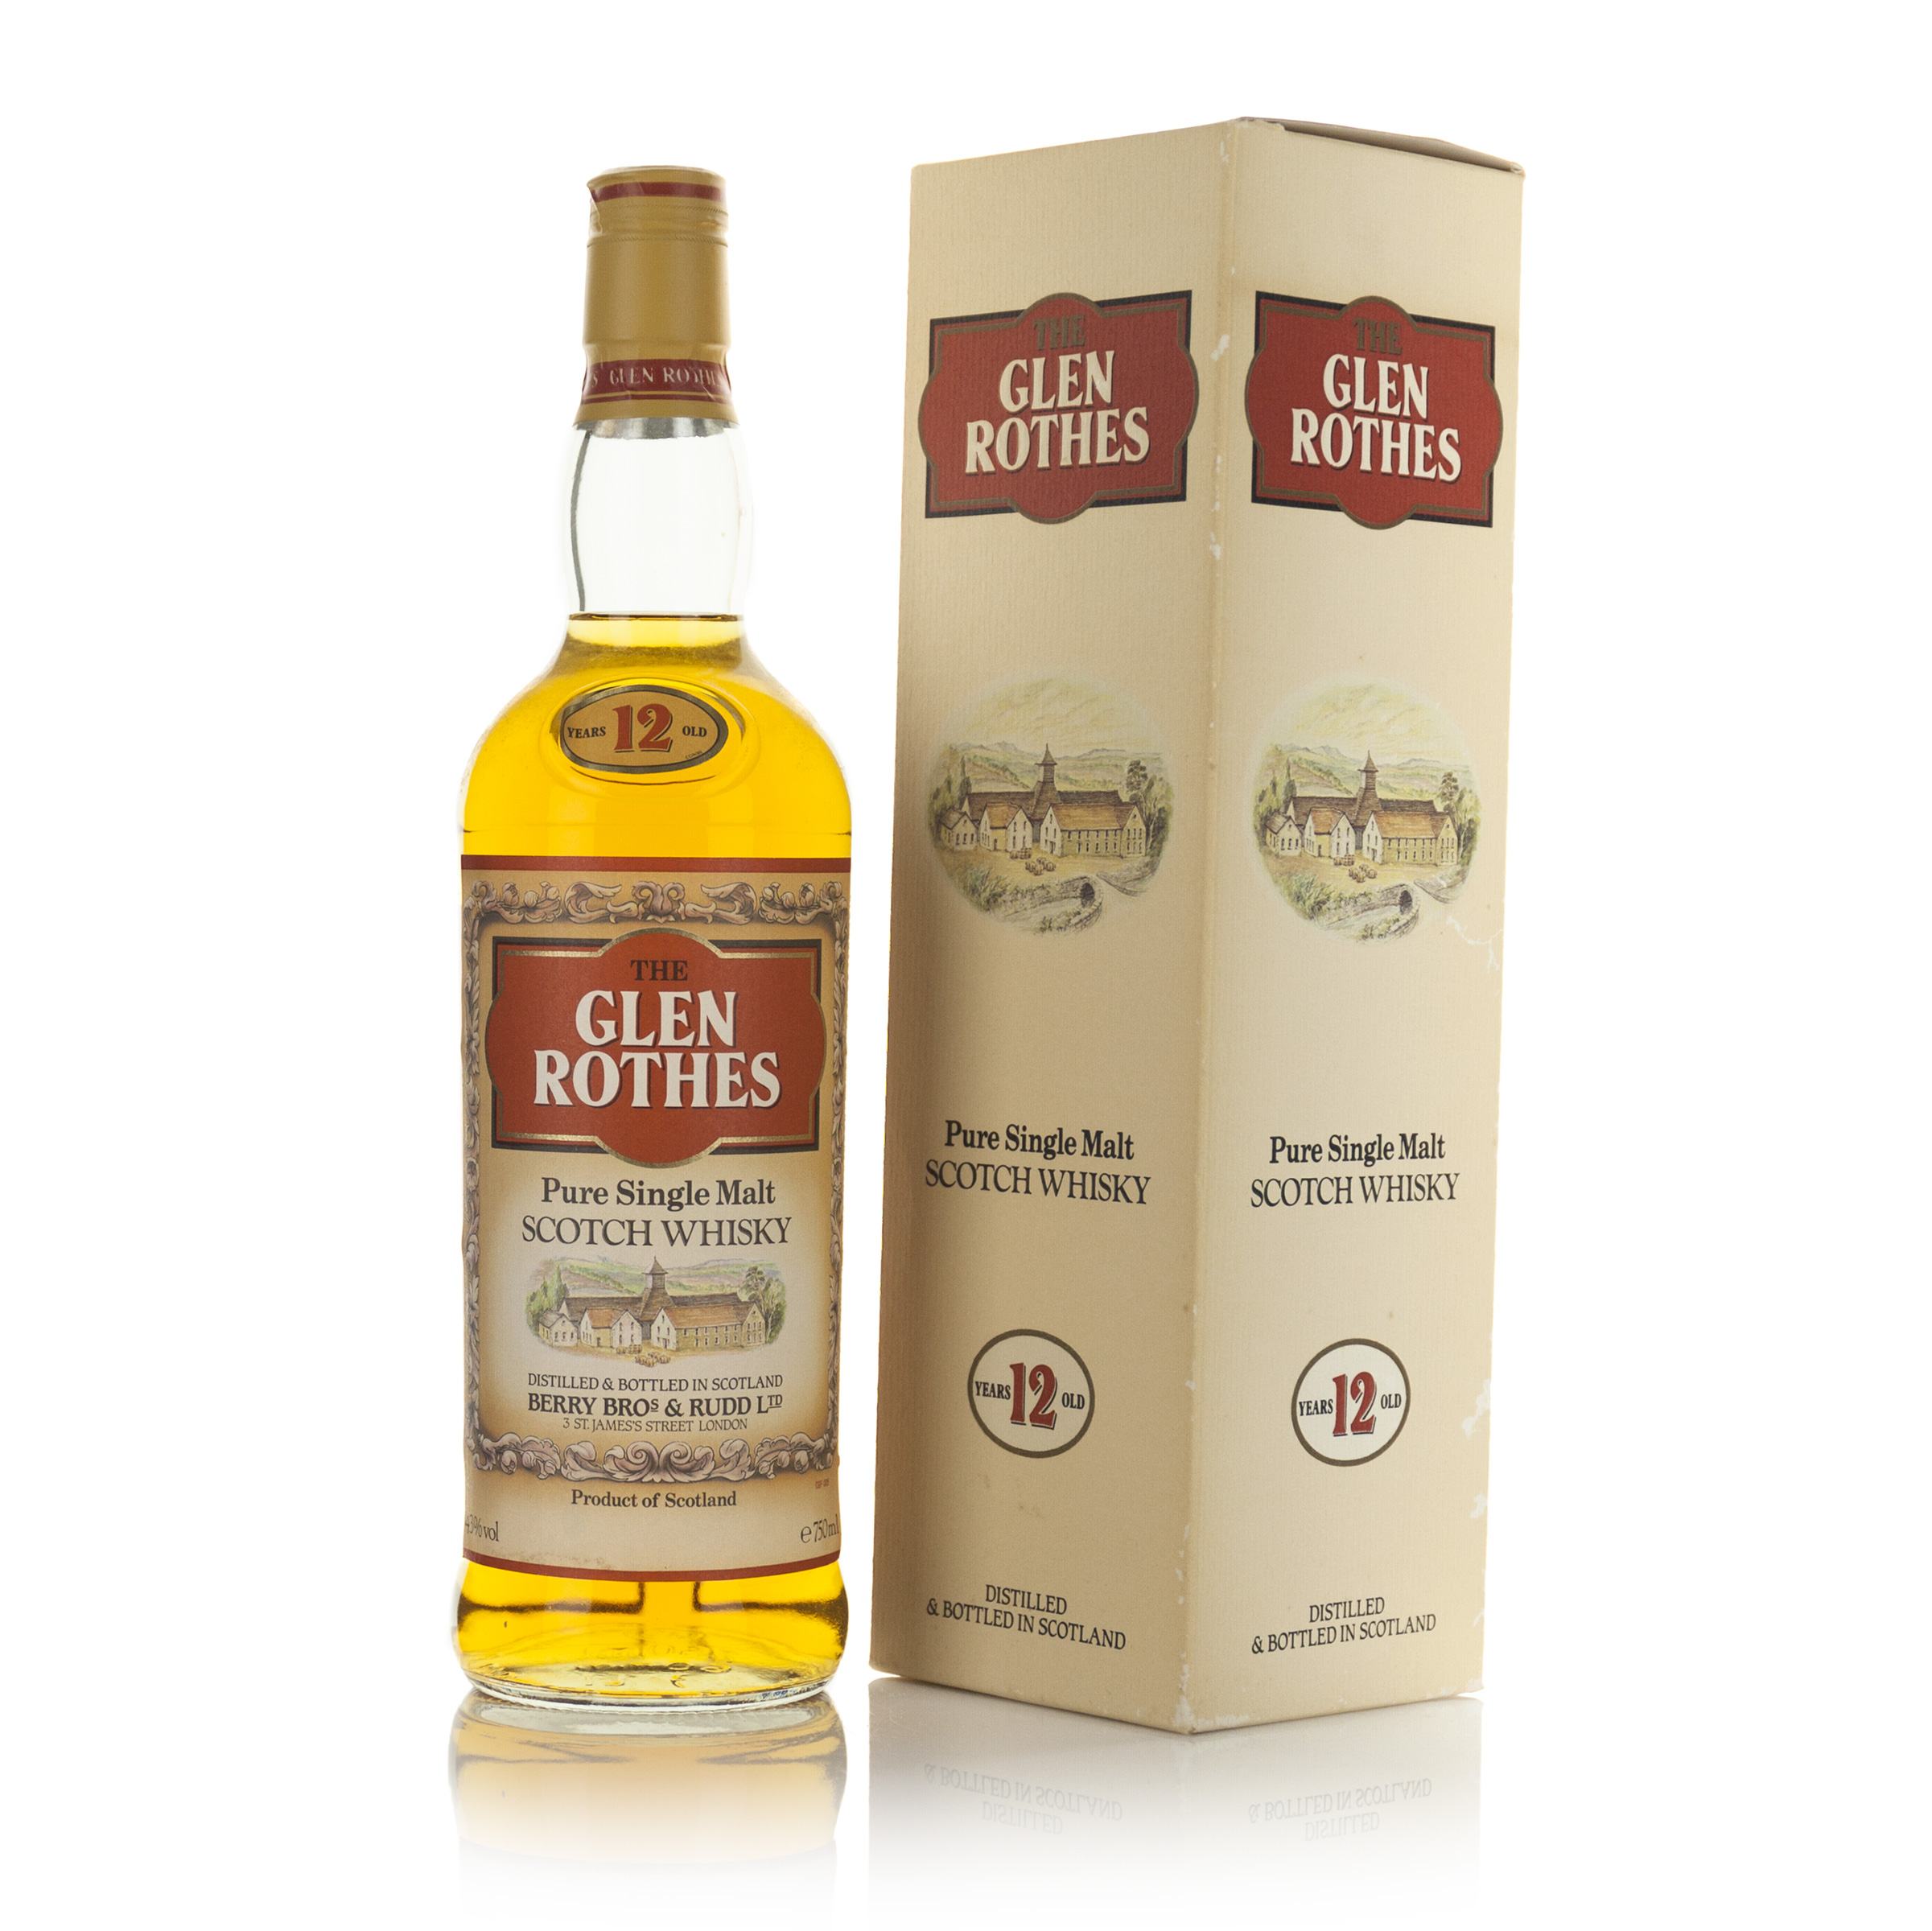 GLEN ROTHES PURE SINGLE MALT SCOTCH WHISKY 12 YEARS (ONE 750 ML)